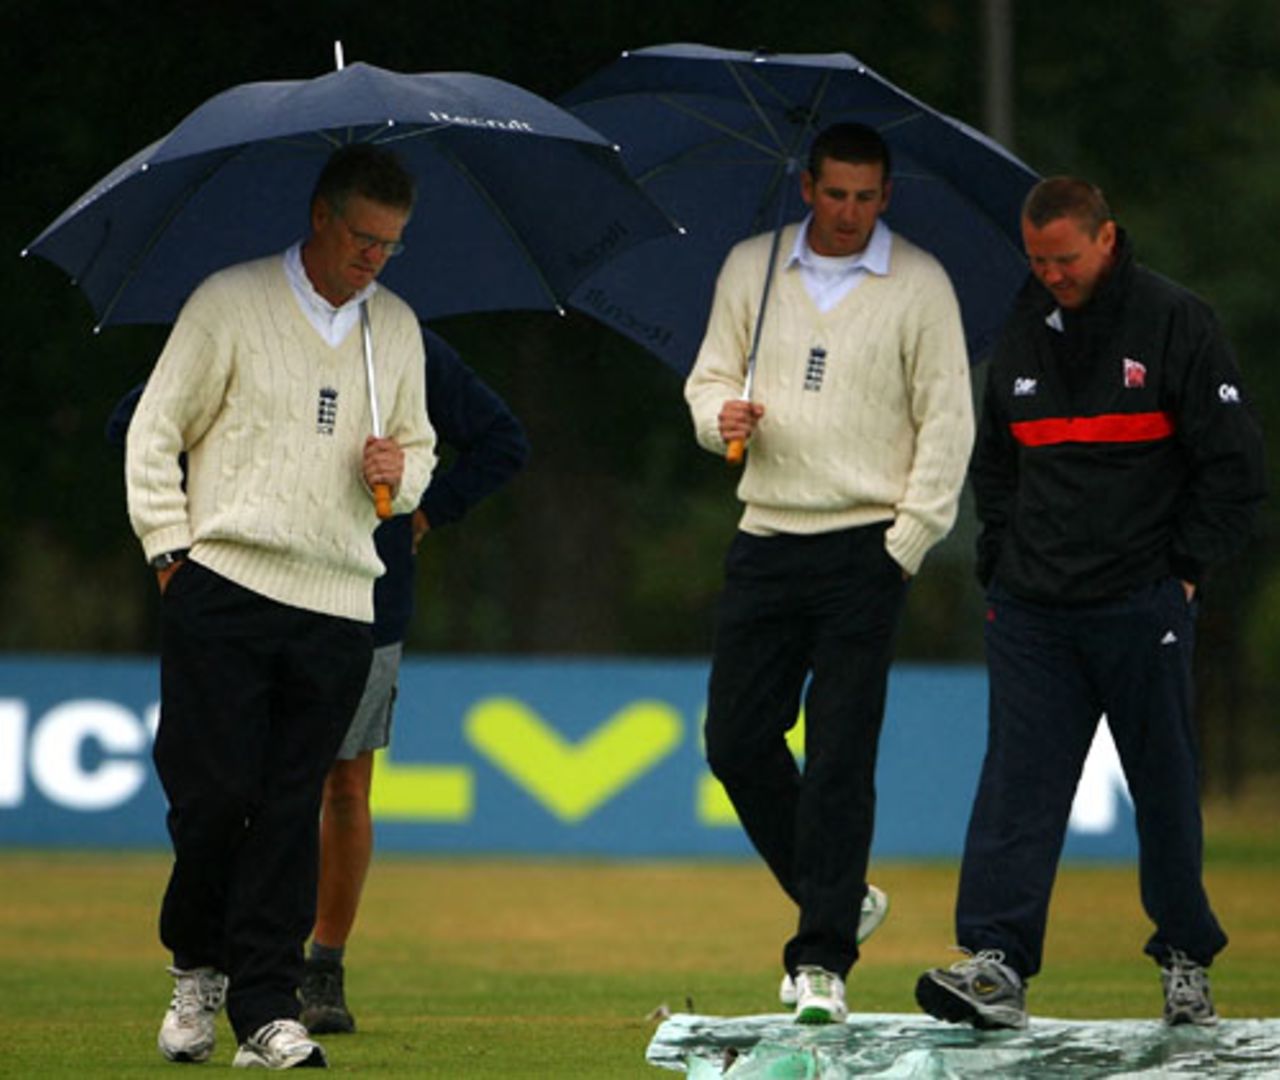 Umpires Steve Garratt and Michael Gough inspect the pitch with the groundsmen, Middlesex v South Africans, Tour match, Uxbridge, July 6, 2008